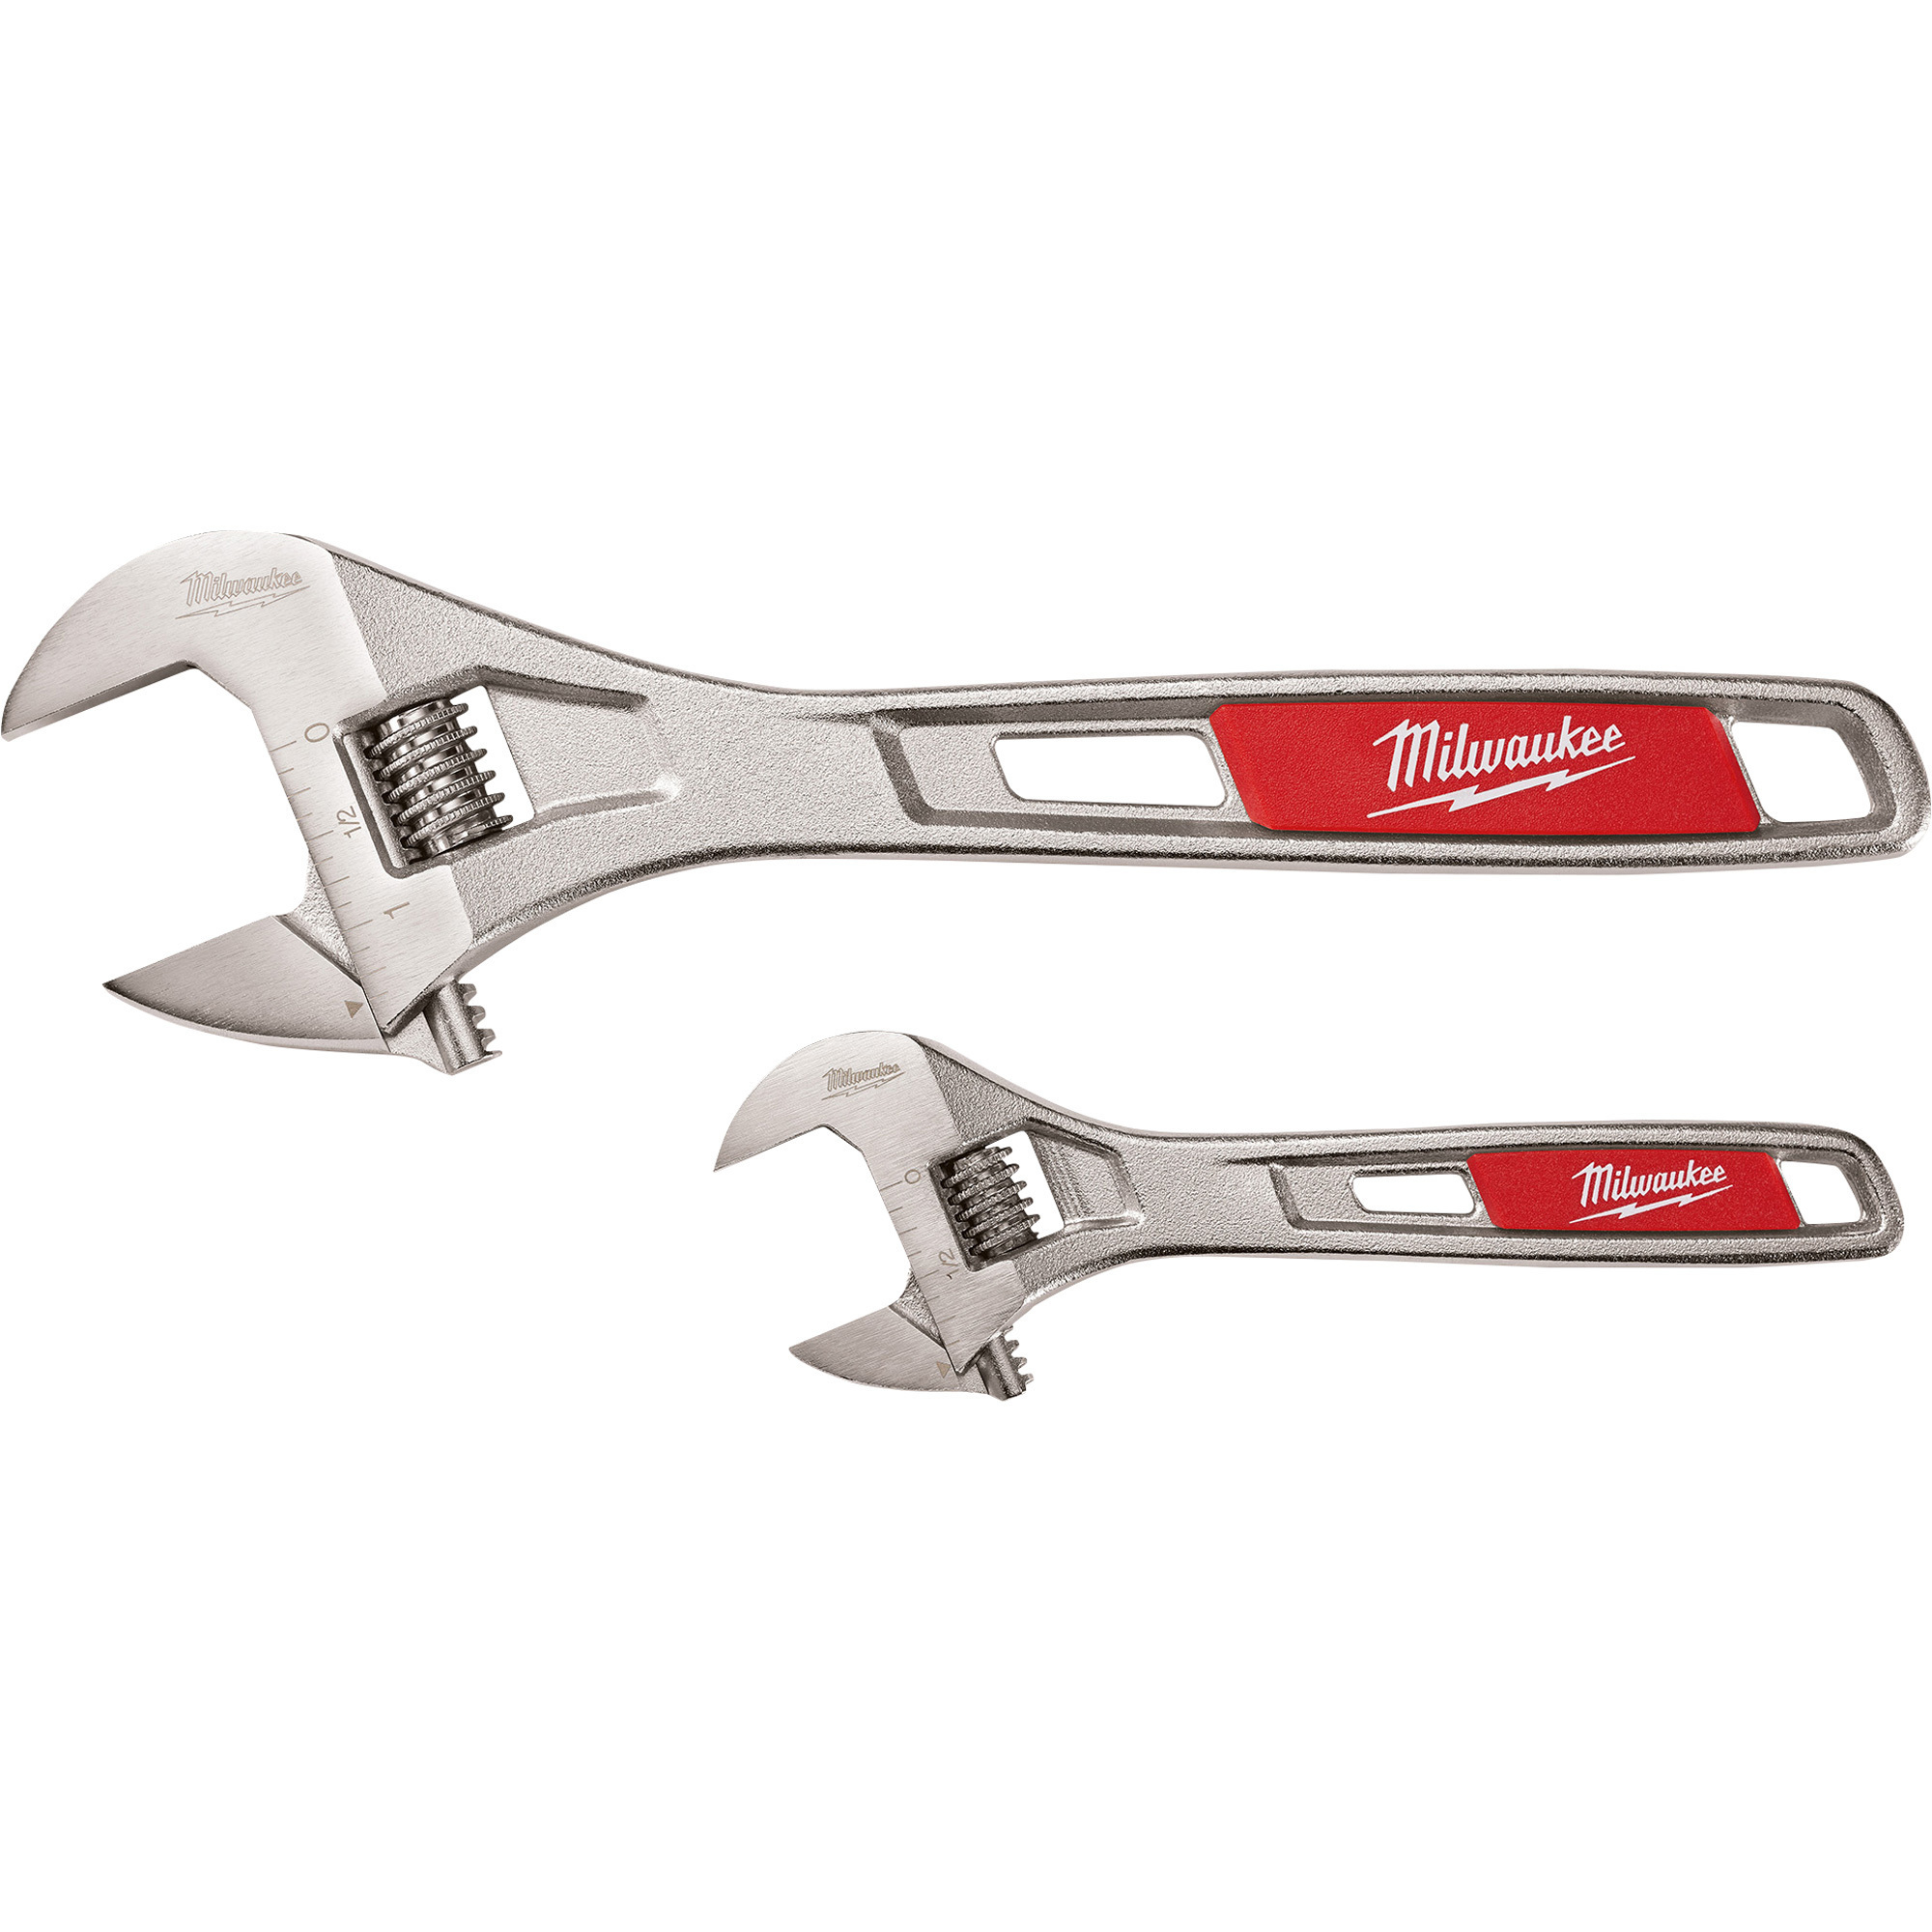 Milwaukee Adjustable Wrench Set, 2-Piece, 6Inch and 10Inch, Model 48-22-7400